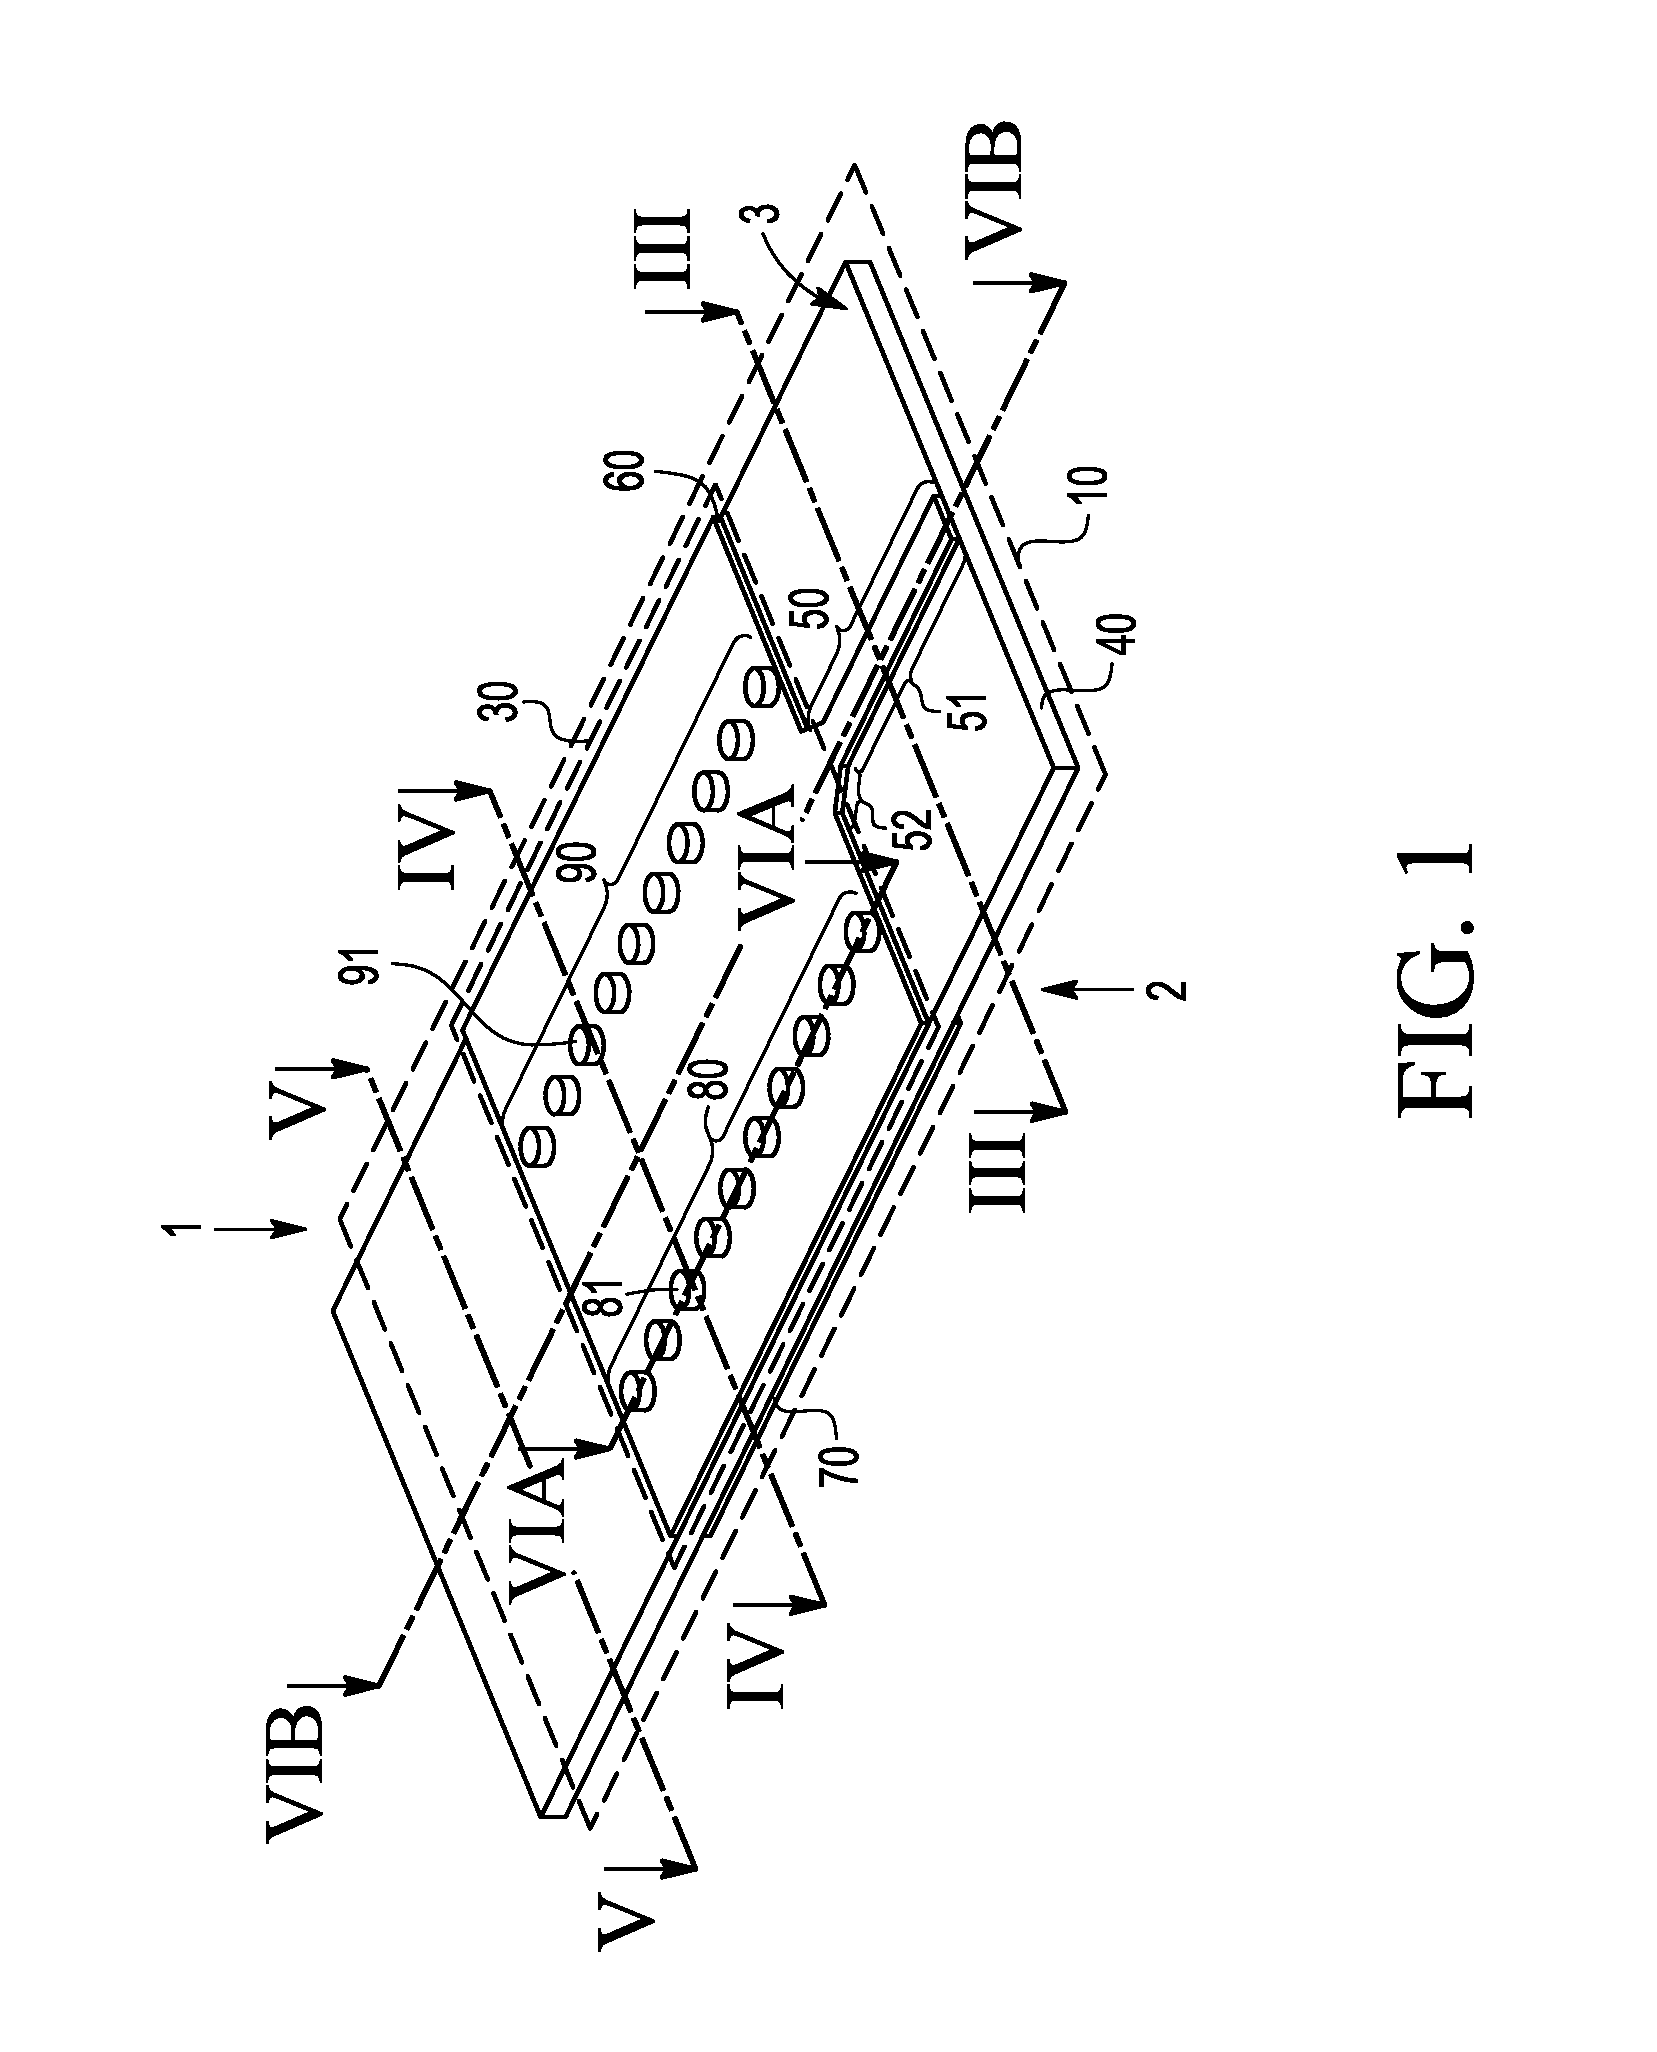 Radio frequency coupling structure